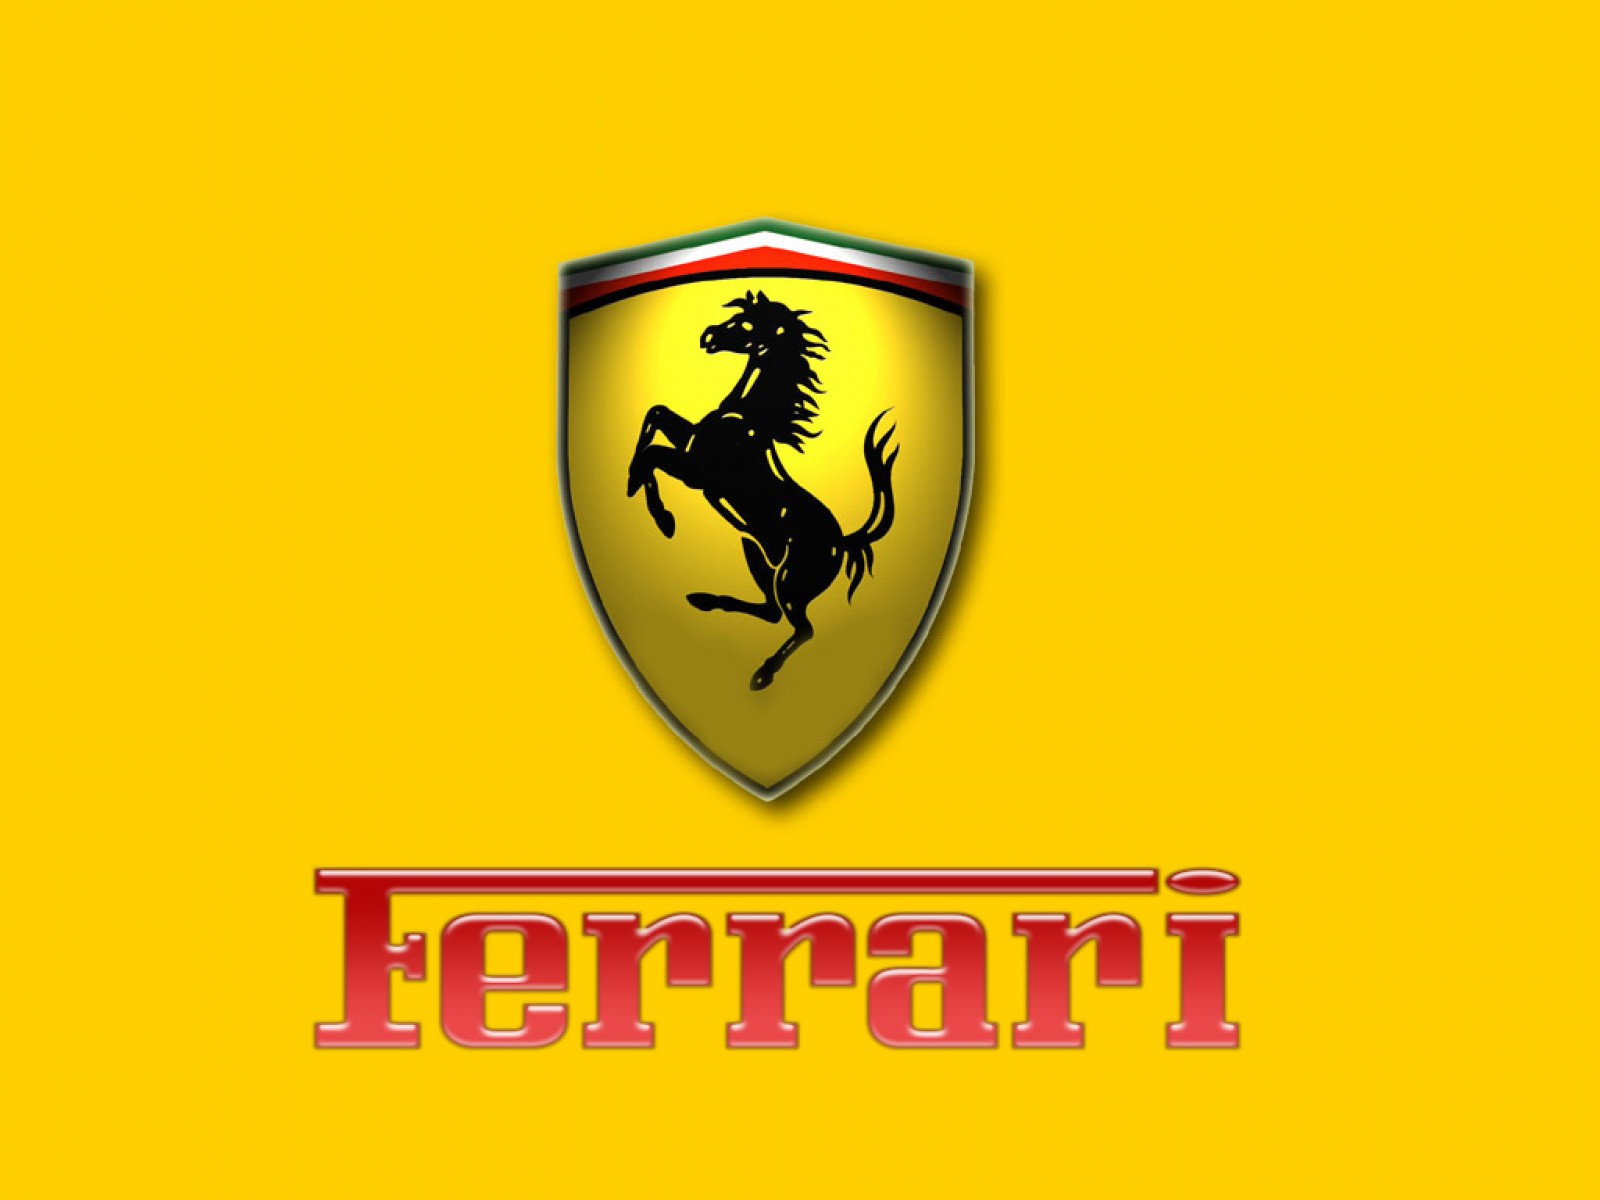 Ferrari is the world’s most powerful brand